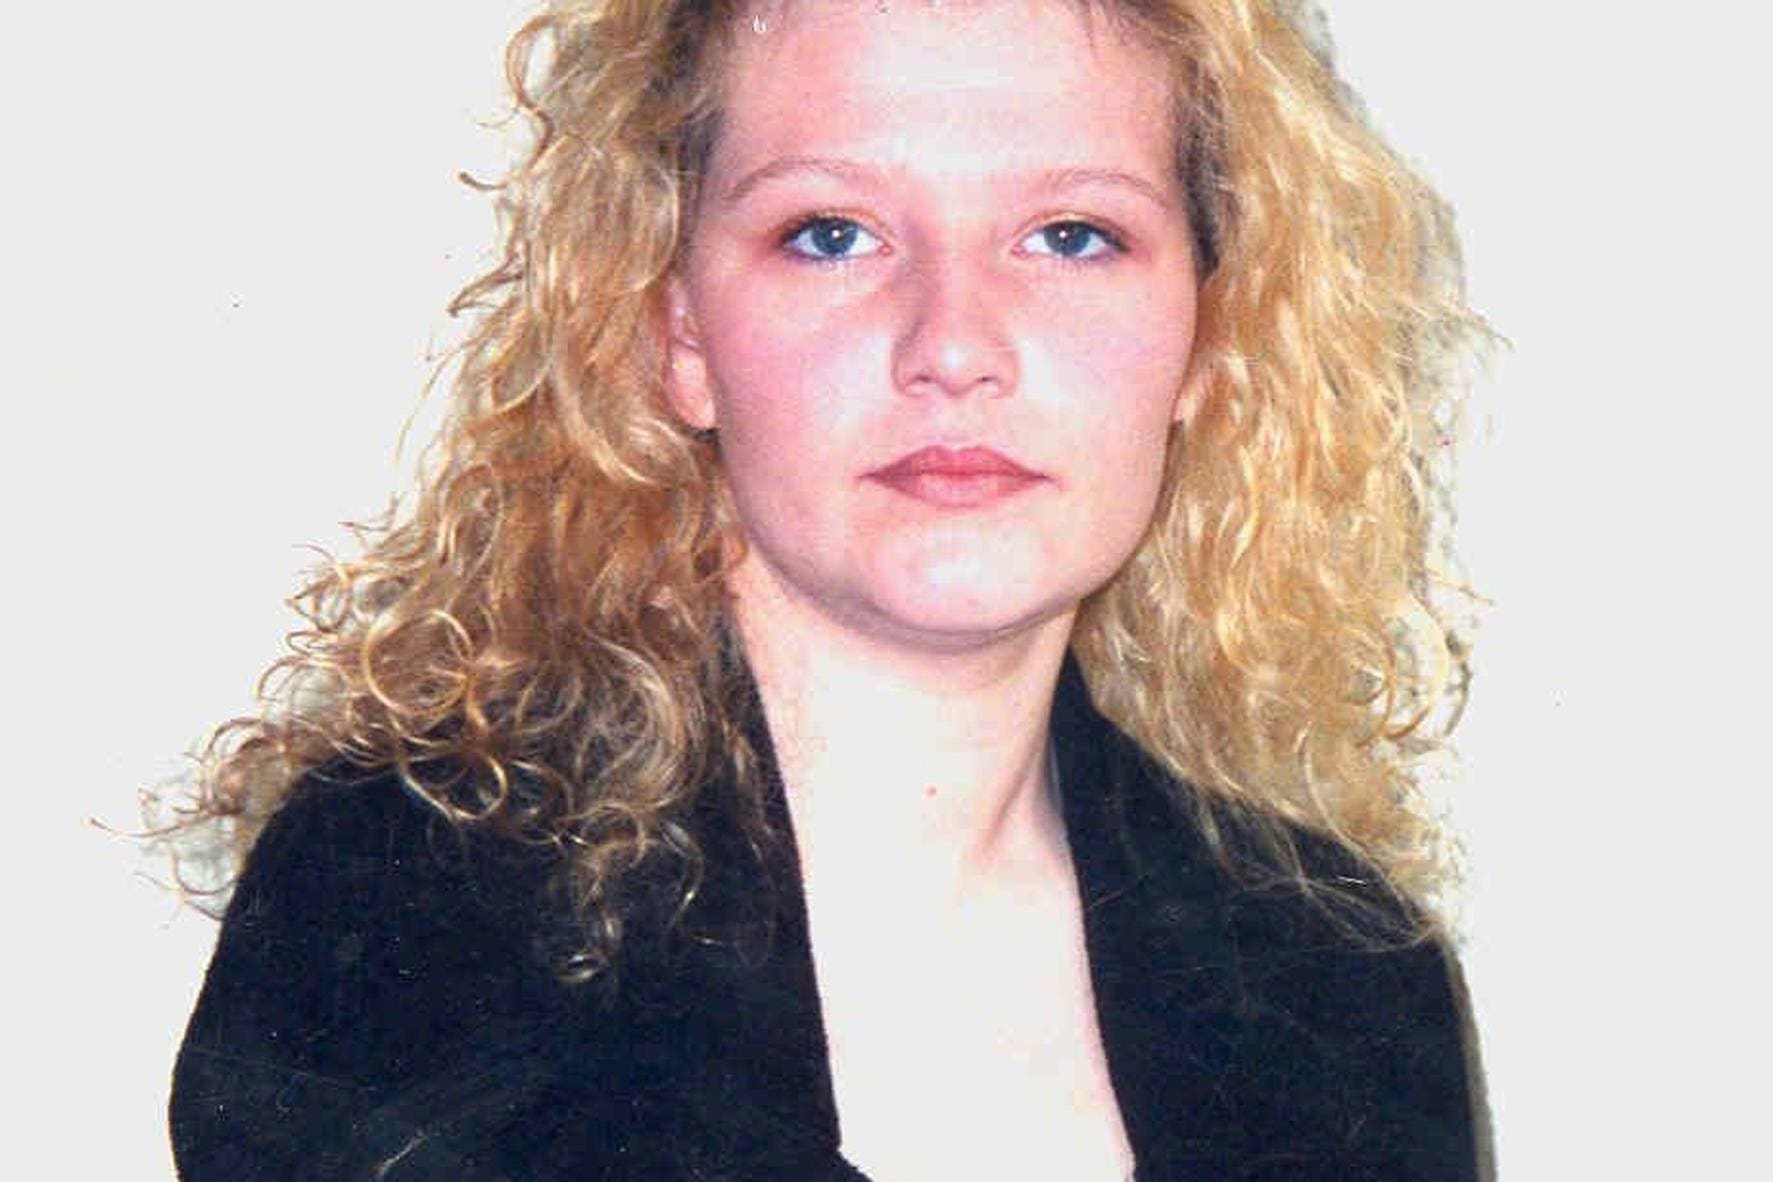 Emma Caldwell was found dead in 2005 (family handout/PA)